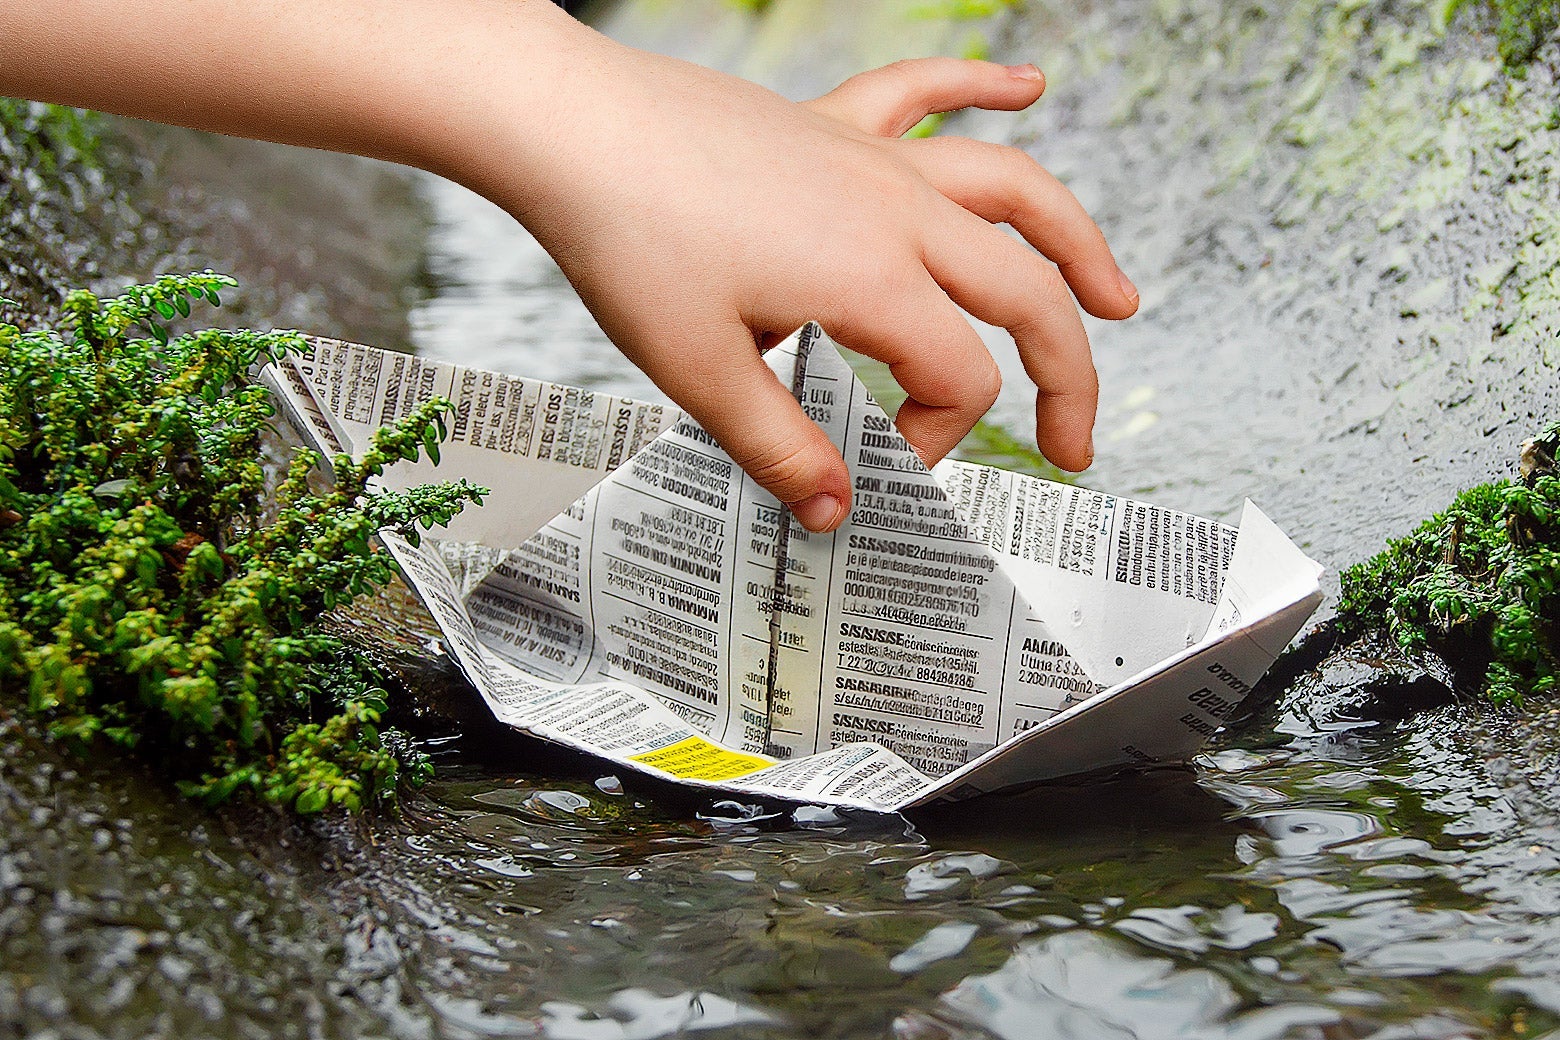 A child's hand gently pulling a newspaper boat out of a gutter.